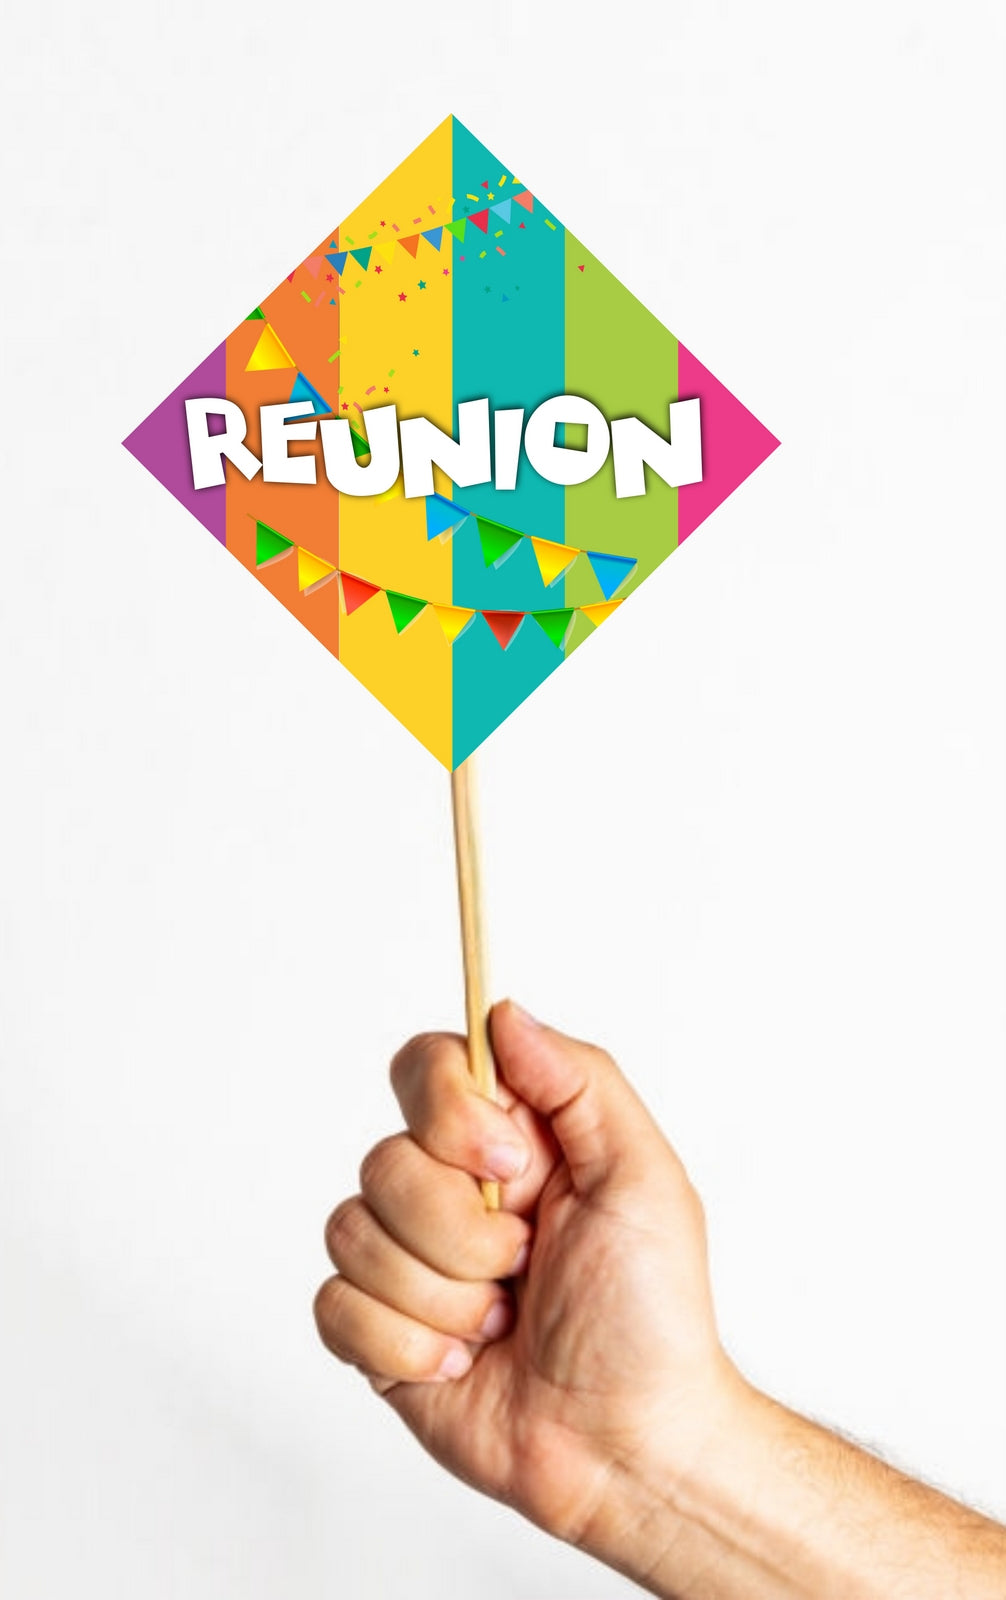 Reunion Photo Booth Party Props College School Reunion Theme Party Decoration Photo Booth Party Item for Adults and Kids (Pack of 10)…